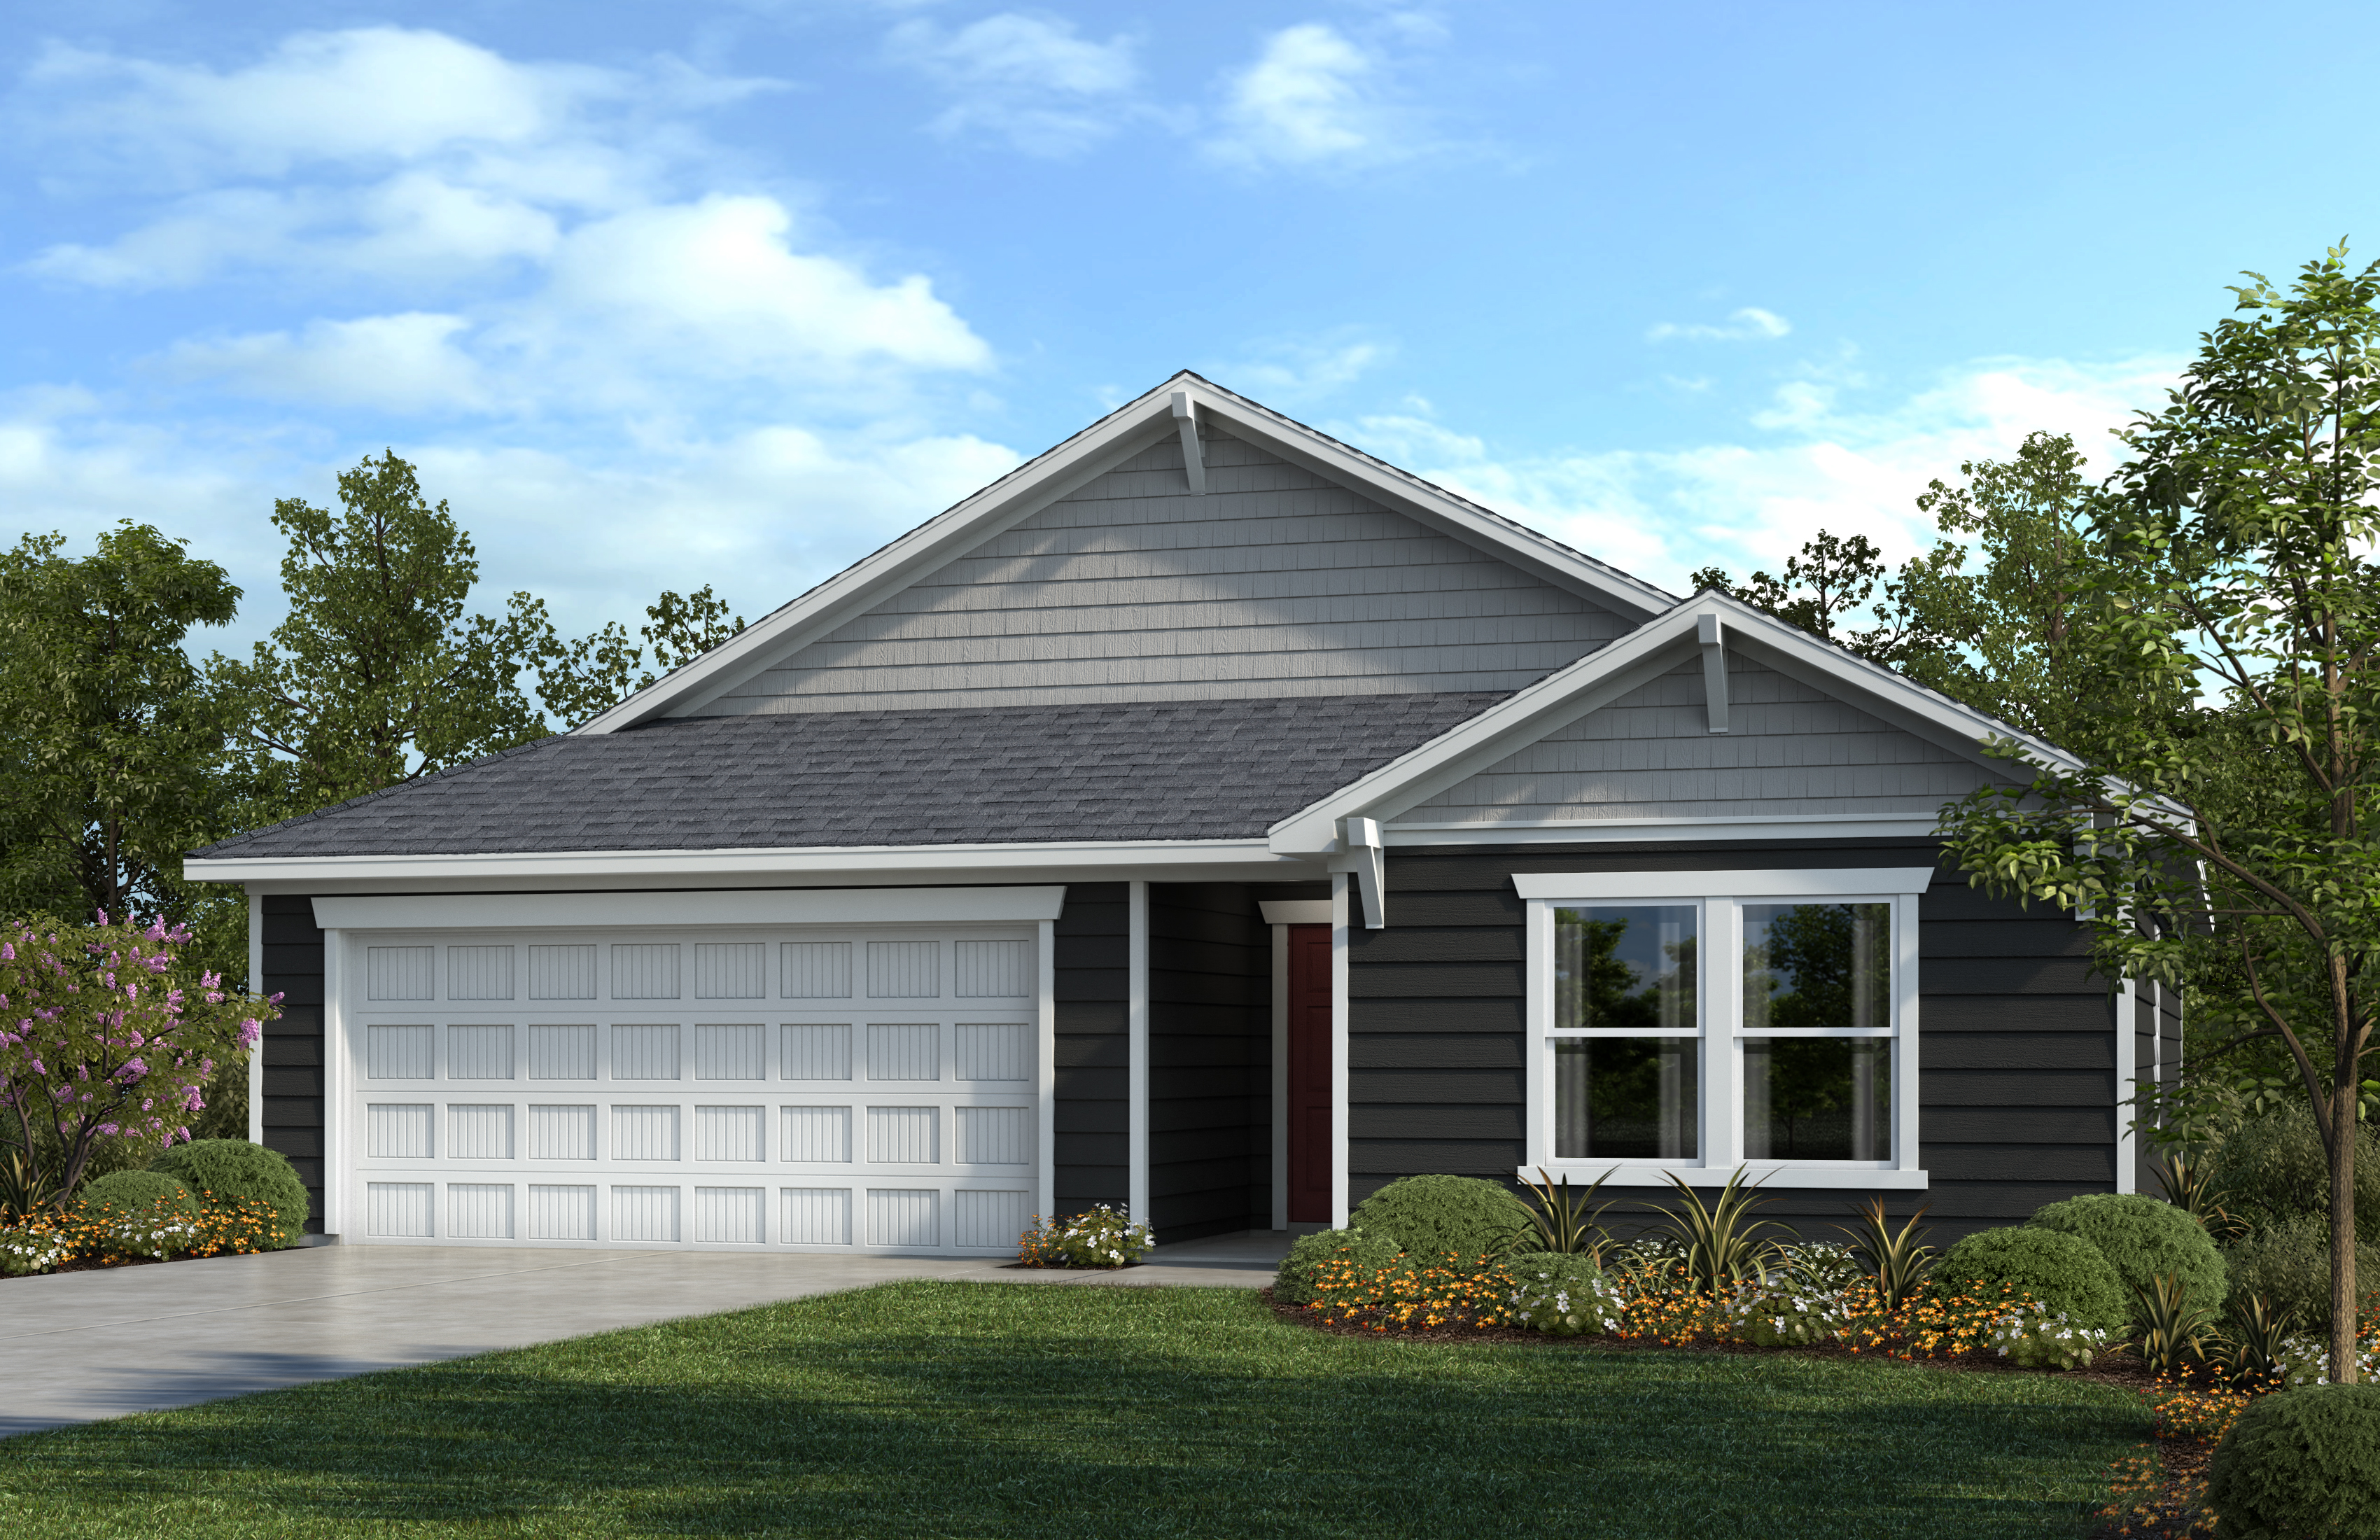 New Homes in 434 Olive Branch Rd., NC - Plan 1582